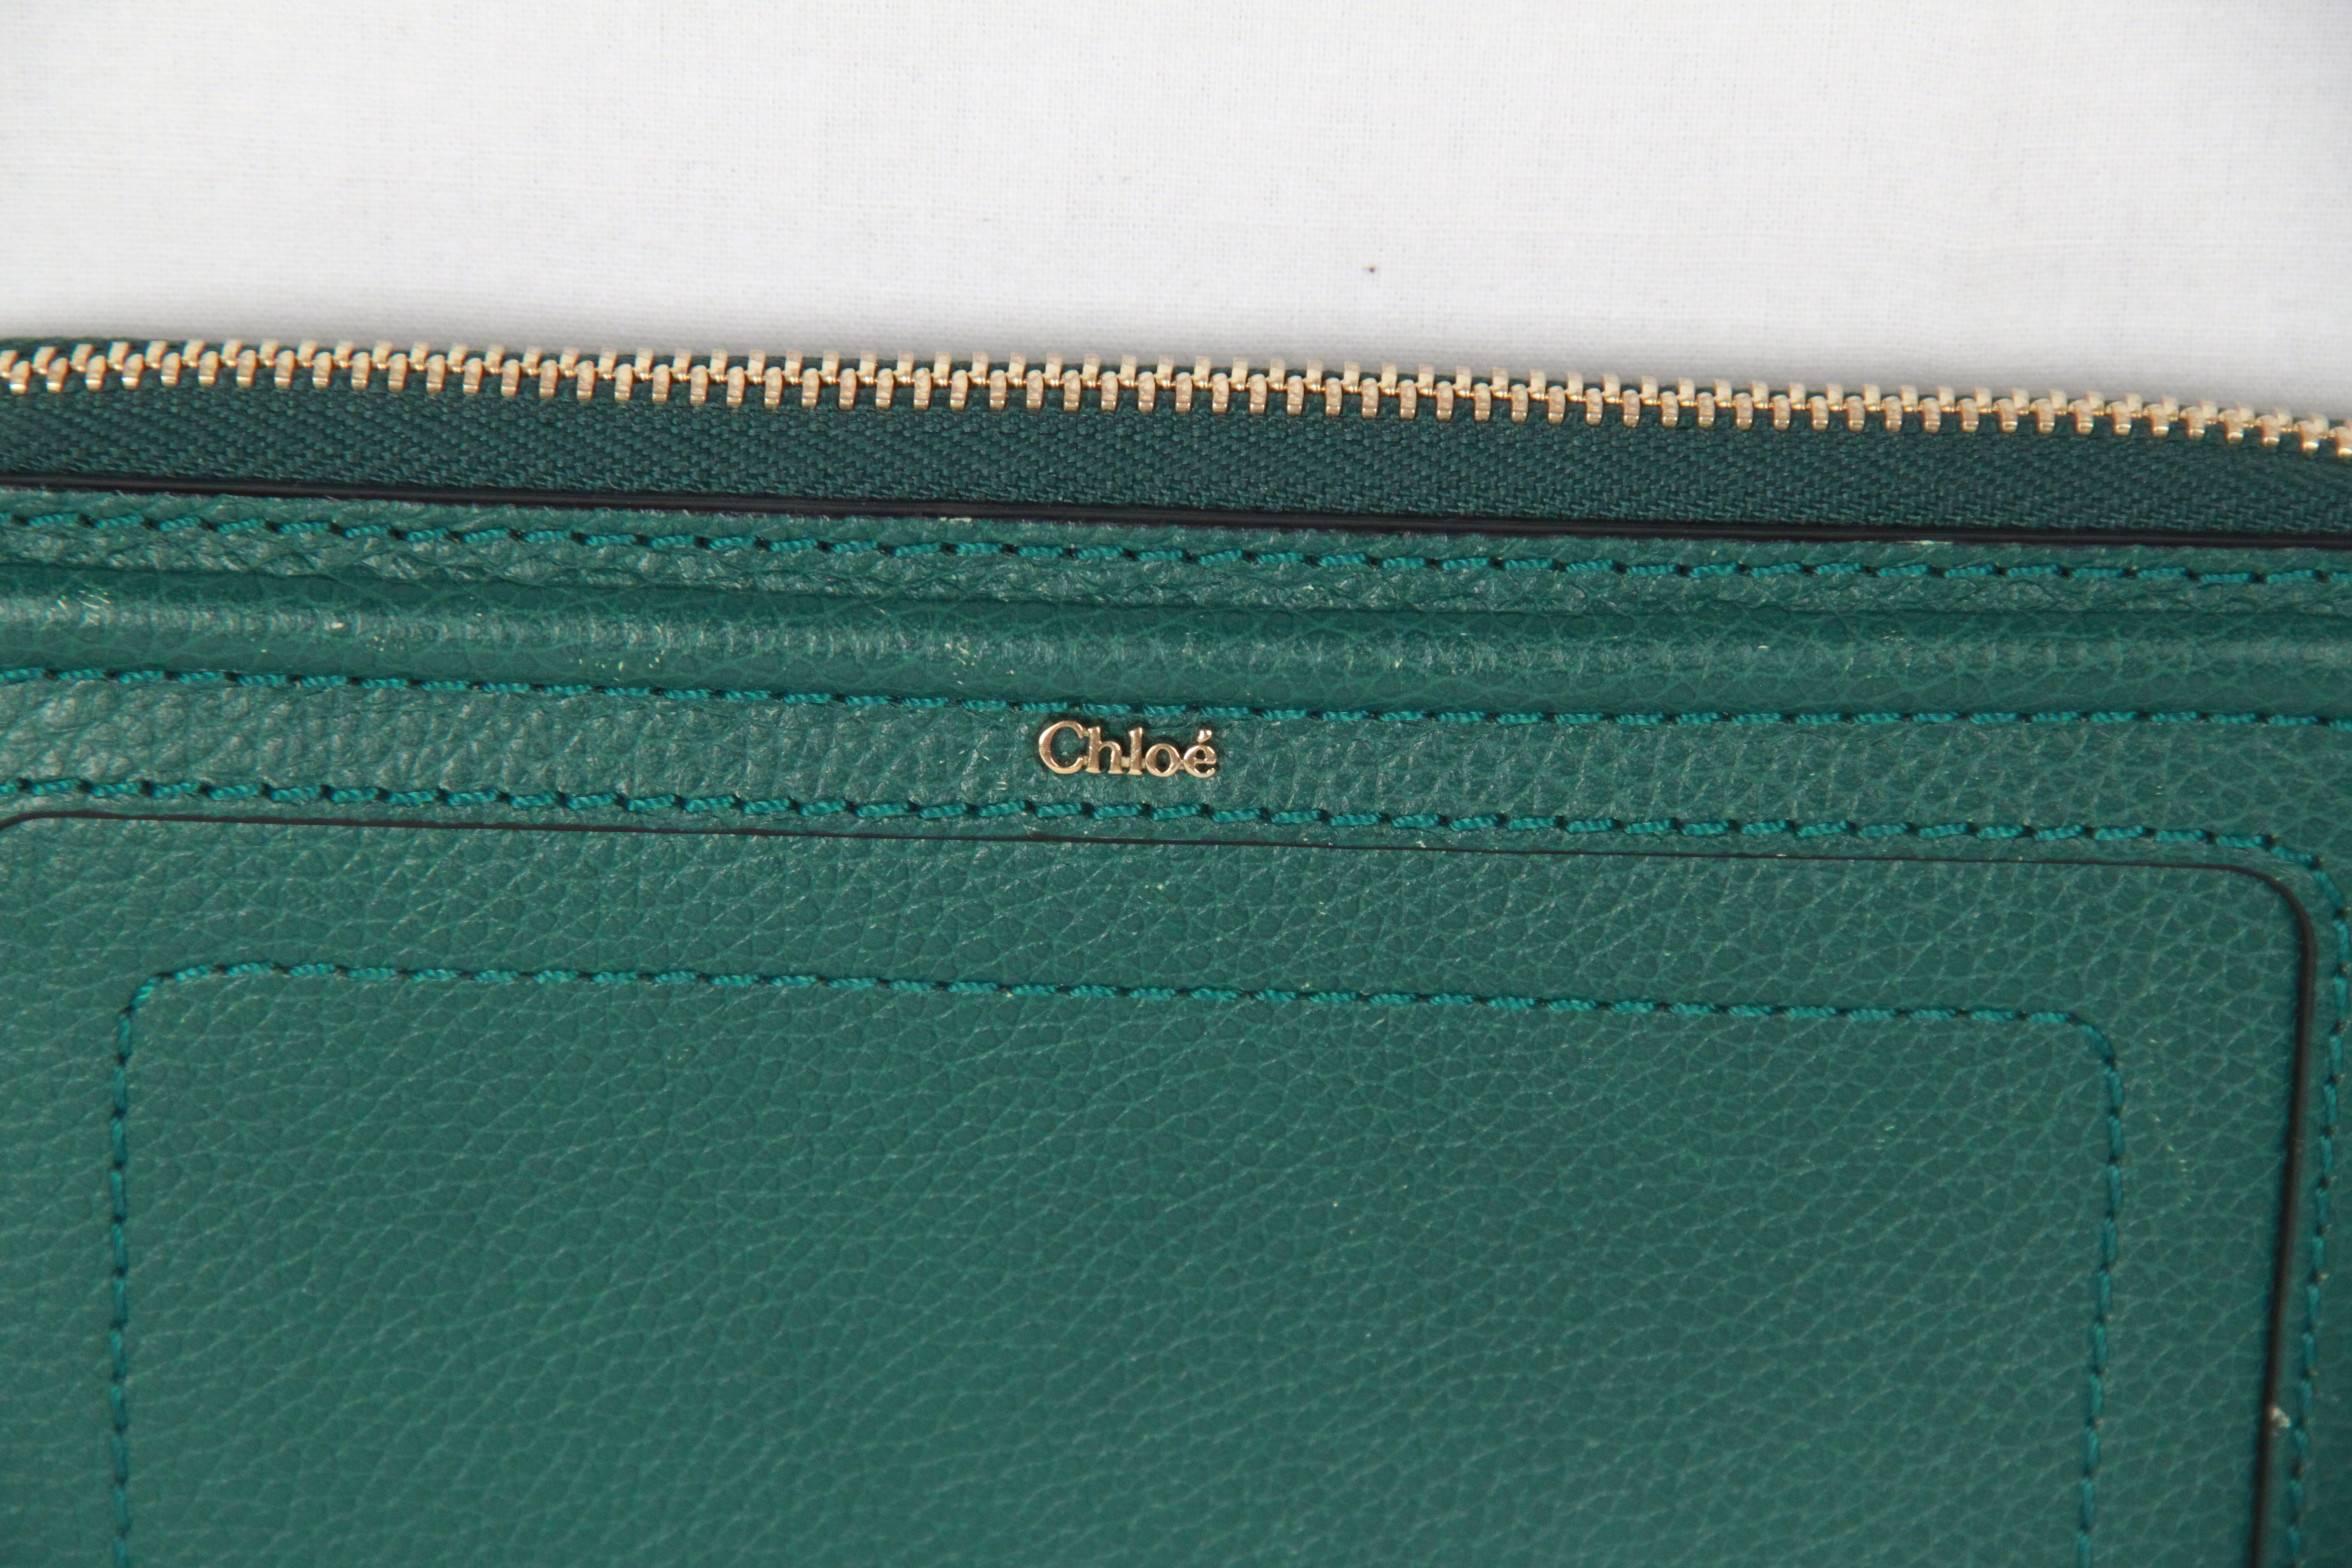 - Continental Wallet by CHLOE, from the 'Paraty' line 
- The style's horseshoe-inspired stitching 
- Pebbled leather with tonal stitching
- Golden hardware
- Piped and topstitched design on front with tubular frame.
- Metal CHLOE logo at center
-